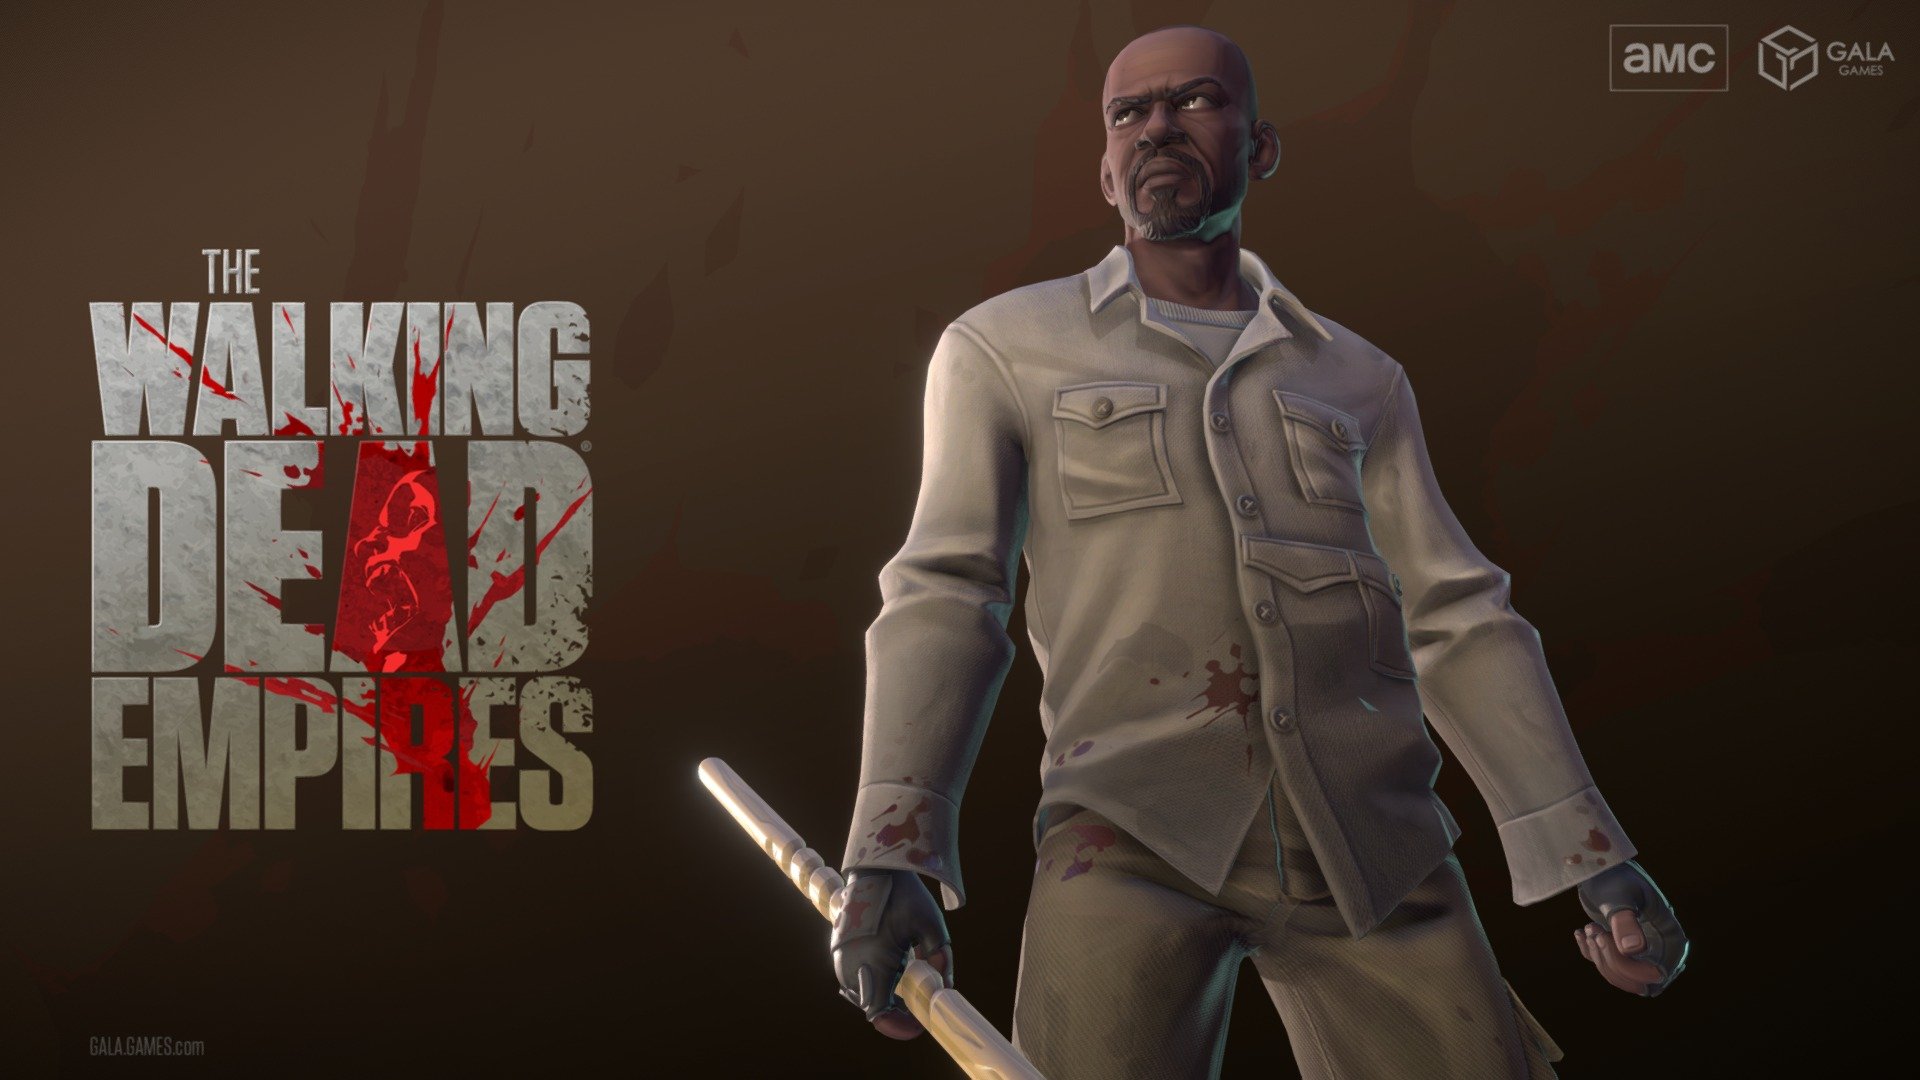 Come and play in the world of the Walking Dead Empires! A new MMO from Gala Games. Get your NFT's while supplies last, or just join in on the carnage and build your empire. (Free to play). Fan favorite Morgan is ready to &ldquo;Clear